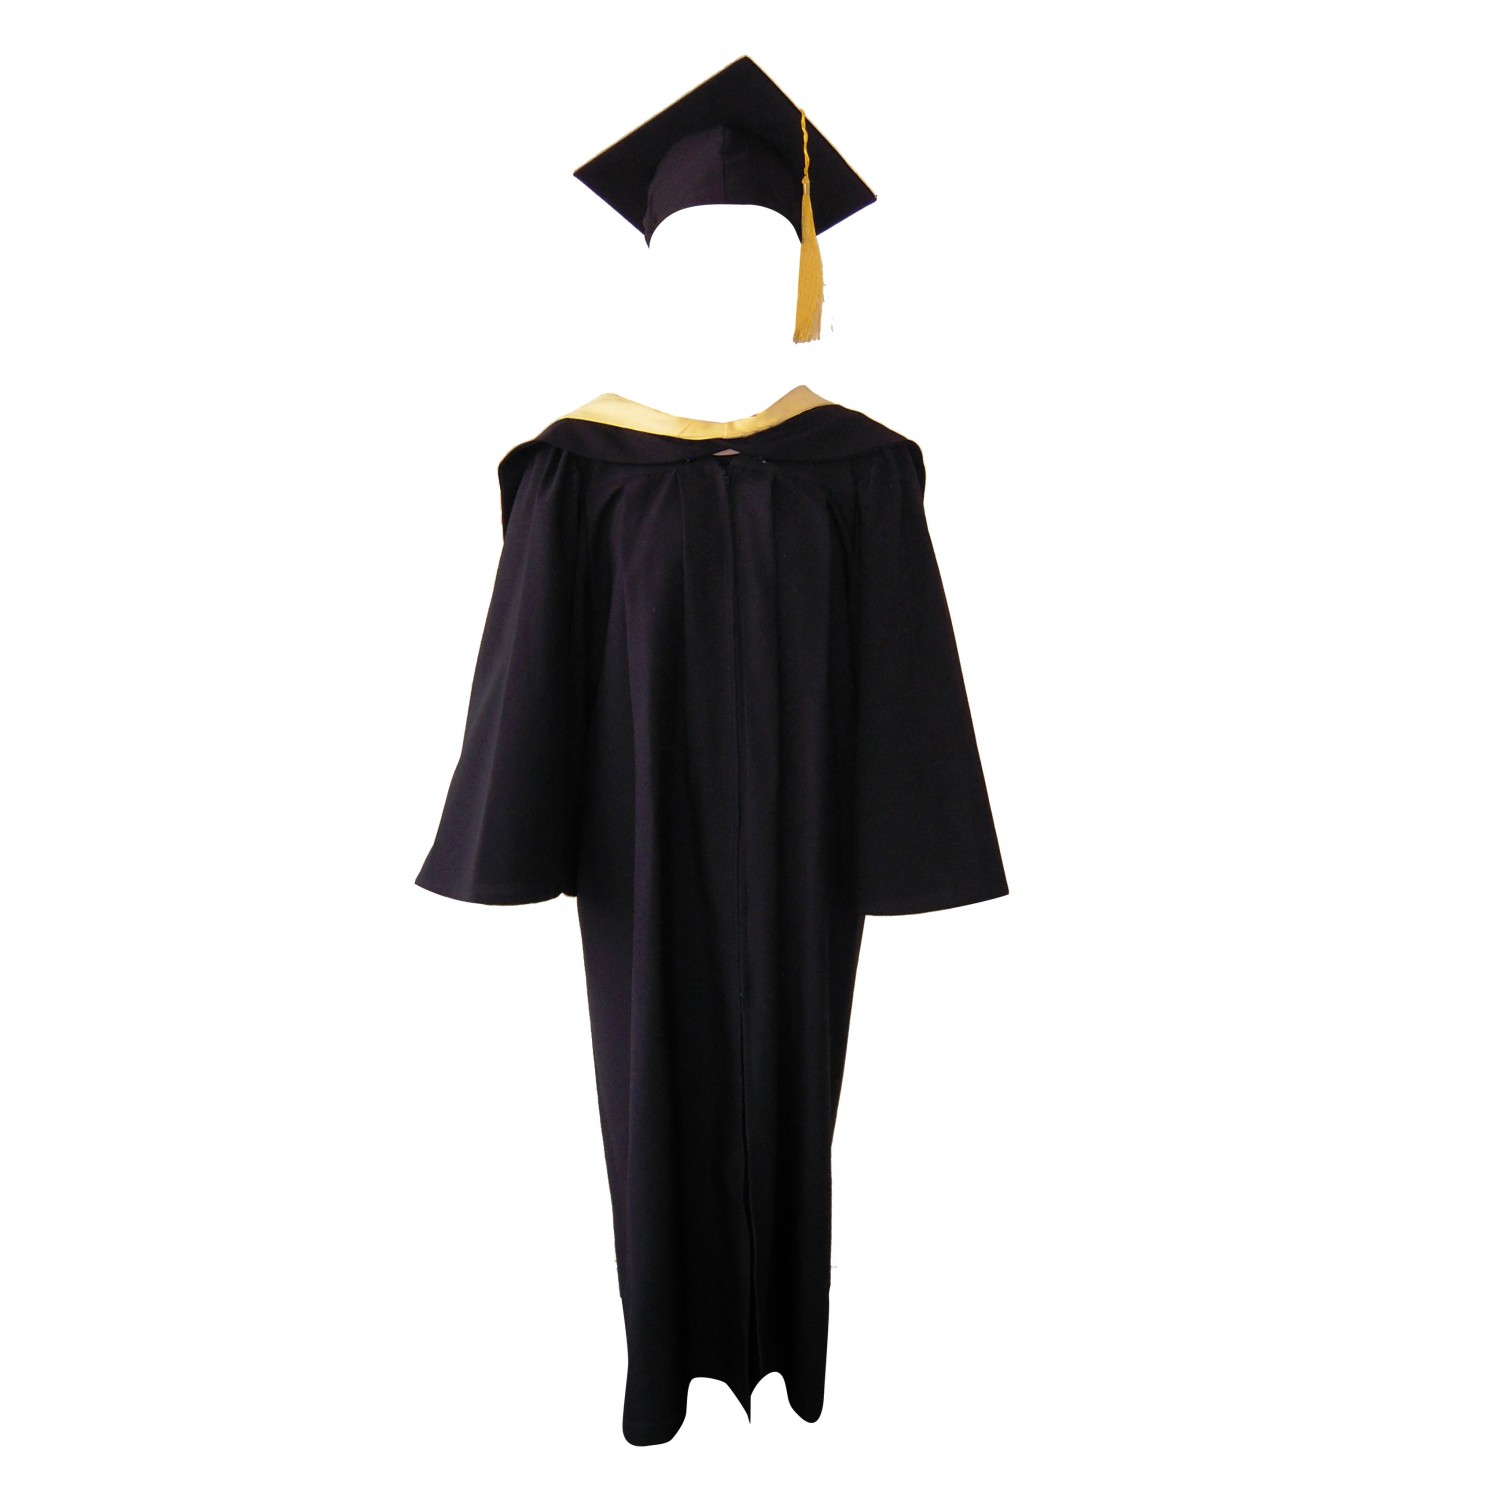 academic regalia for masters degree graduates such as caps, gowns, hood and  tam.